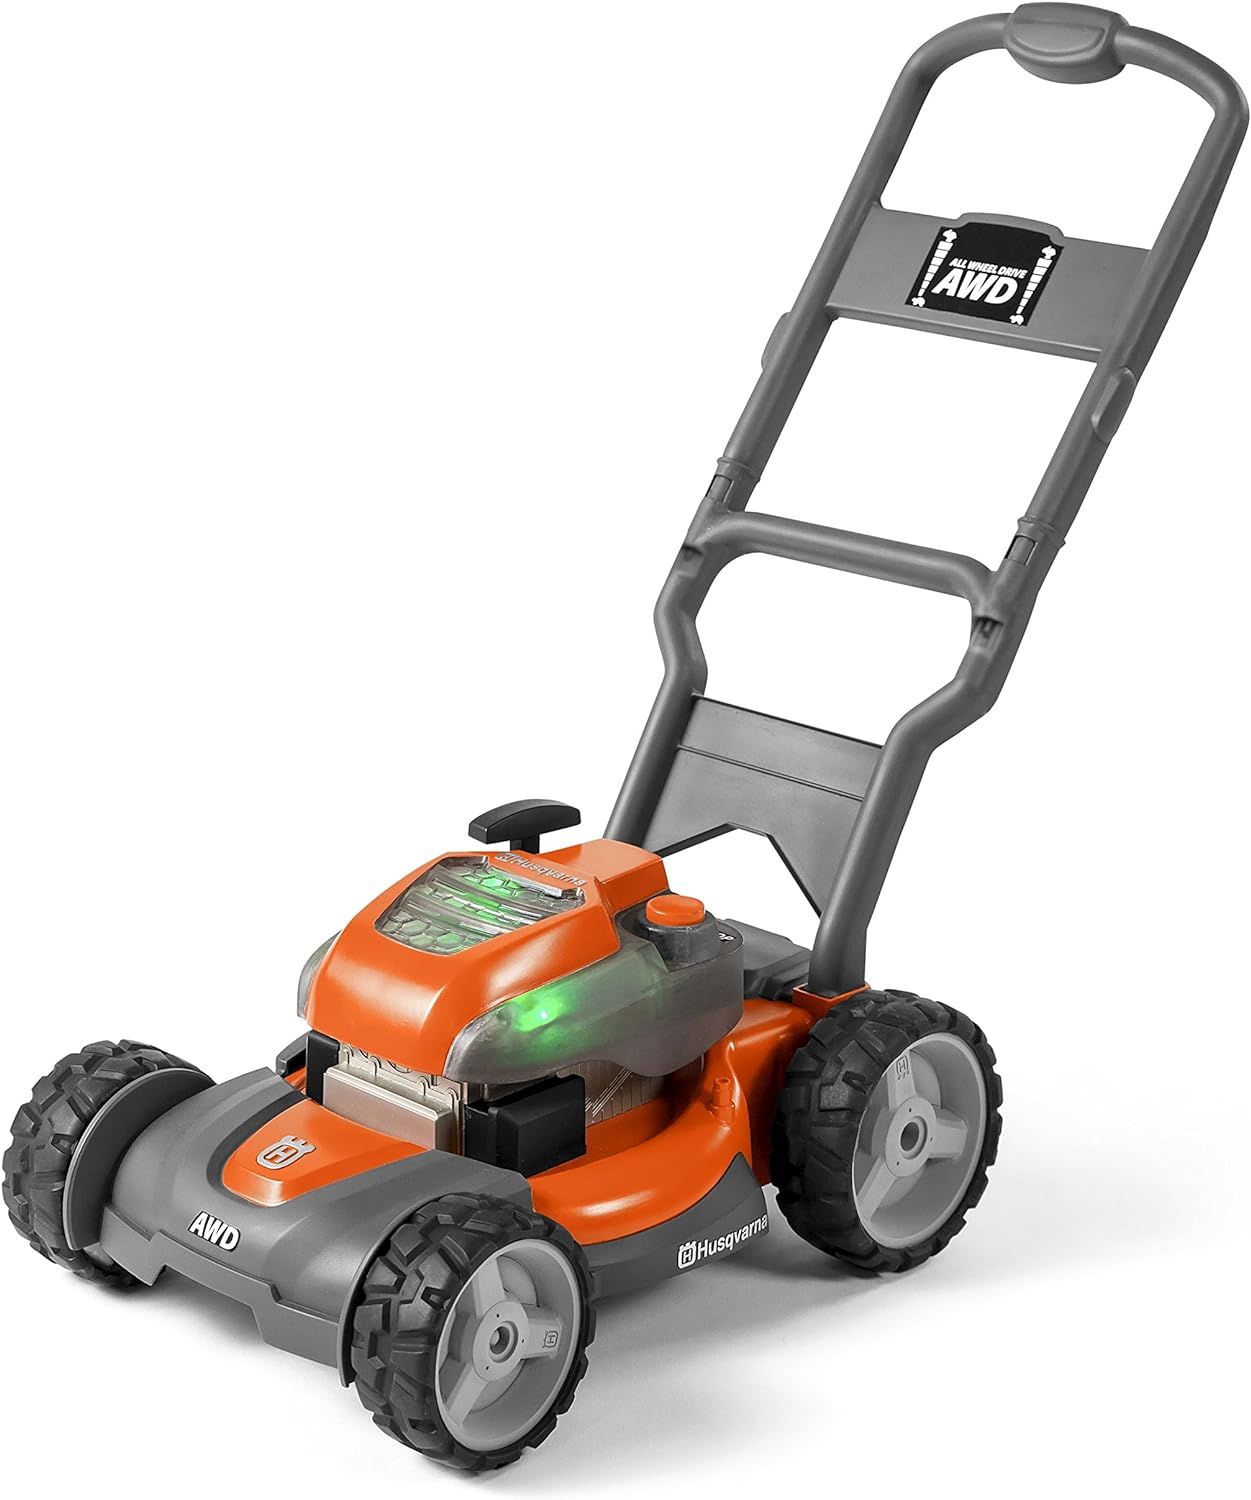 Husqvarna Toy Lawn Mower with Realistic Sounds and Light-Up Engine, Toddler Lawn Mower Toy for Ag... | Amazon (US)